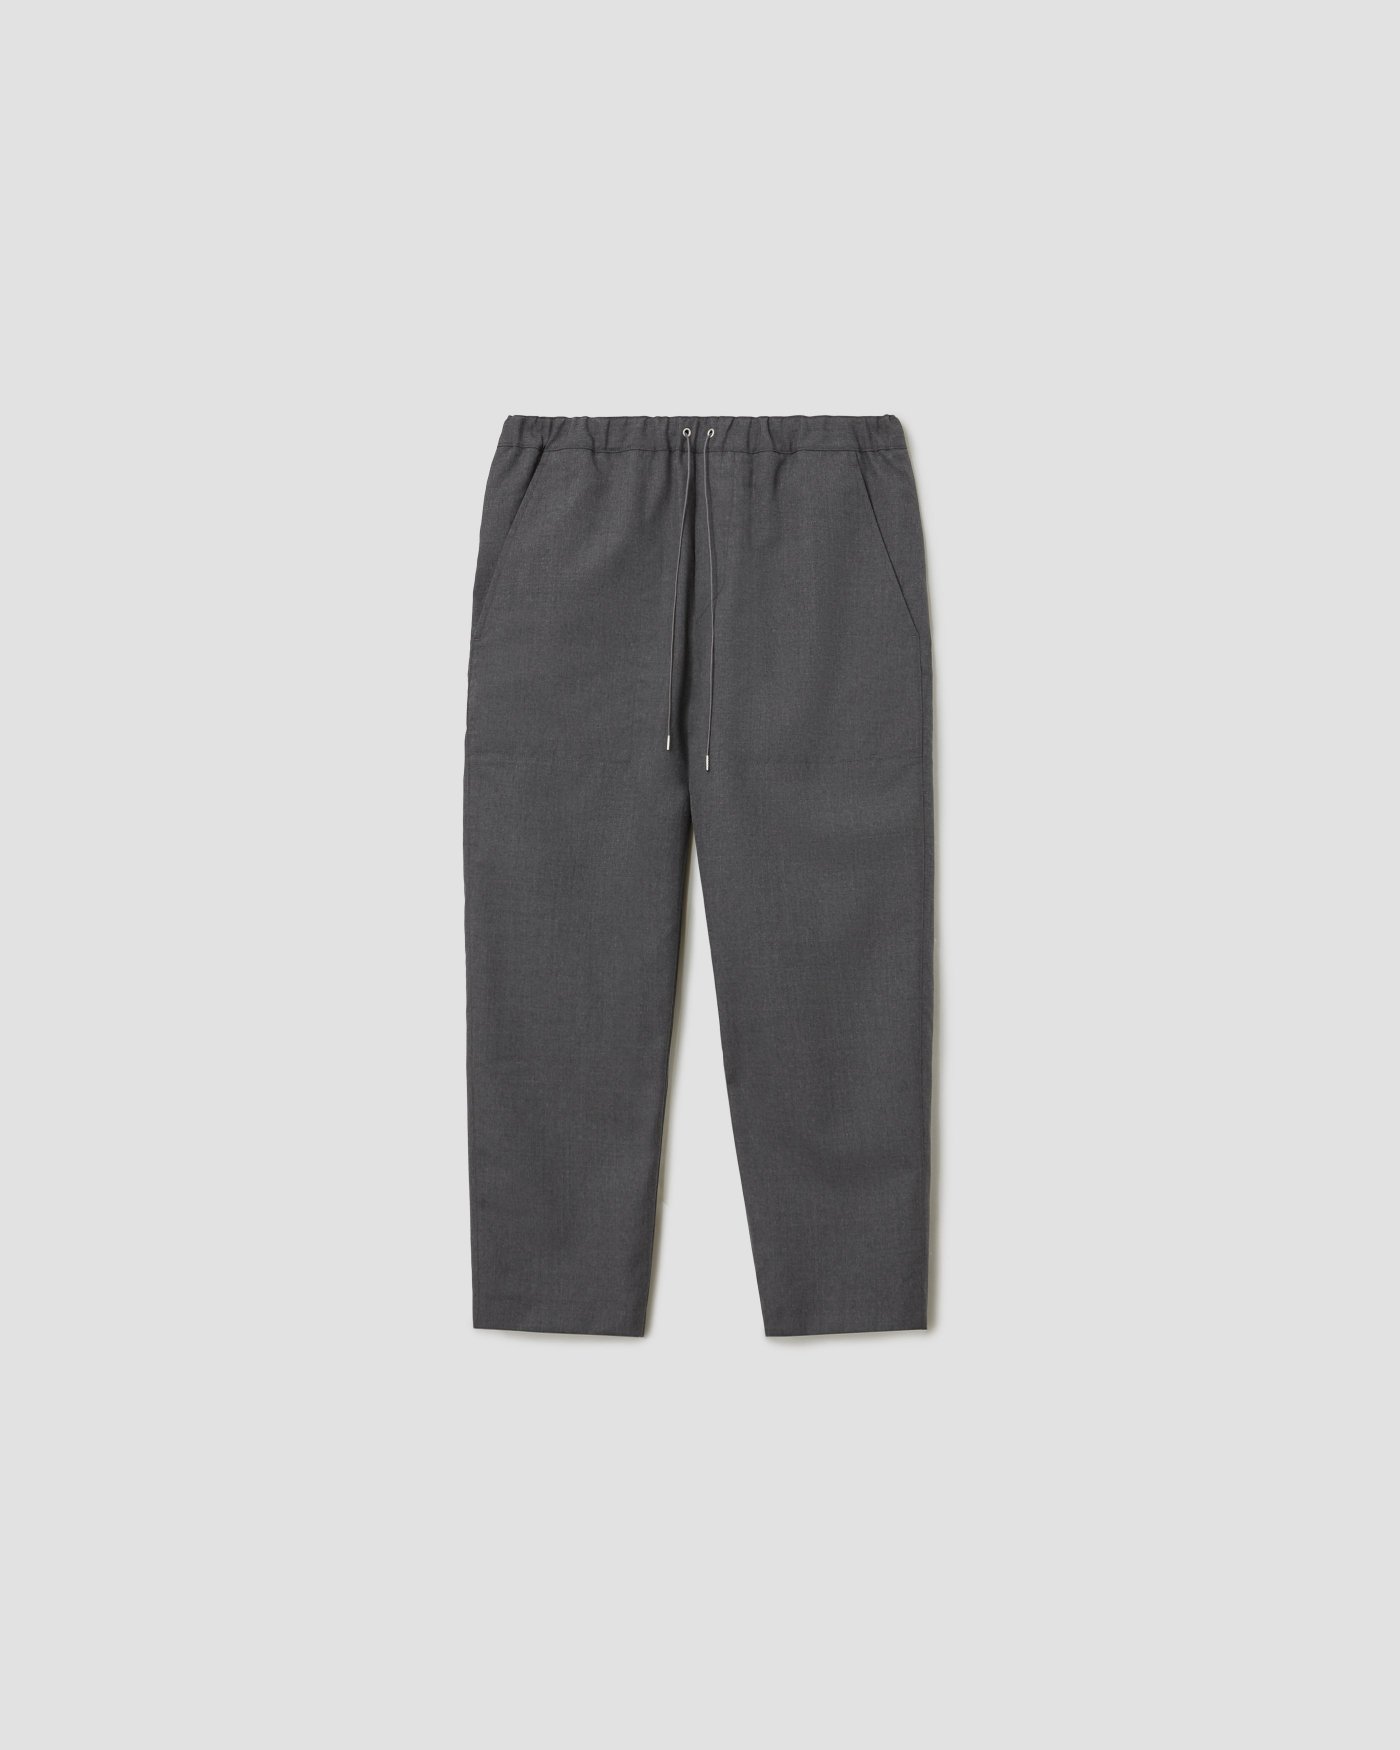 CROPPED DRAWCORD TROUSERS DARK HEATHER - OAMC